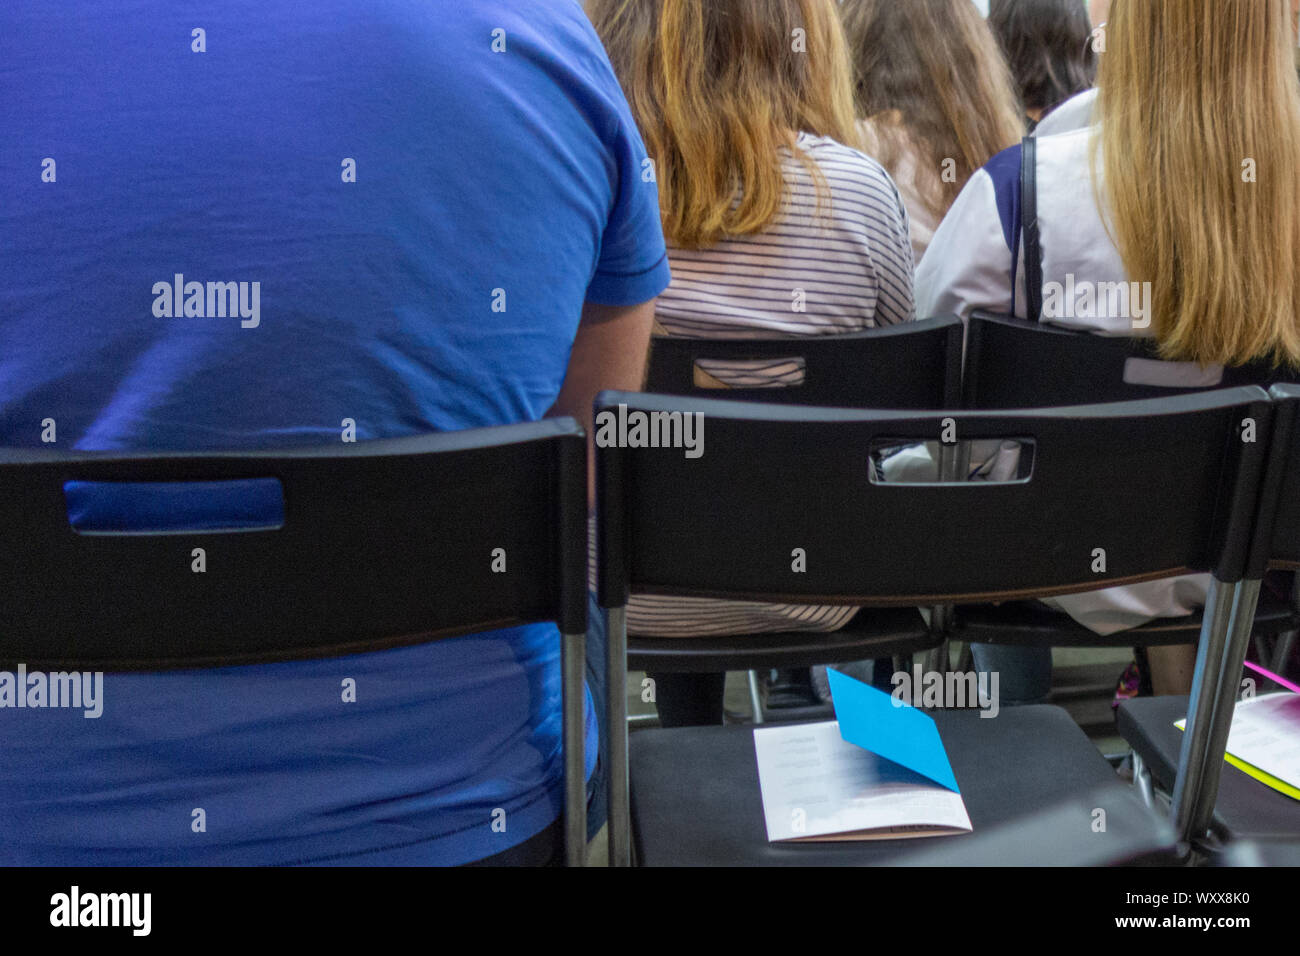 People in auditory during presentation or seminar. Teenagers or young men and women at university lecture or seminar. Back side view with no faces. Th Stock Photo